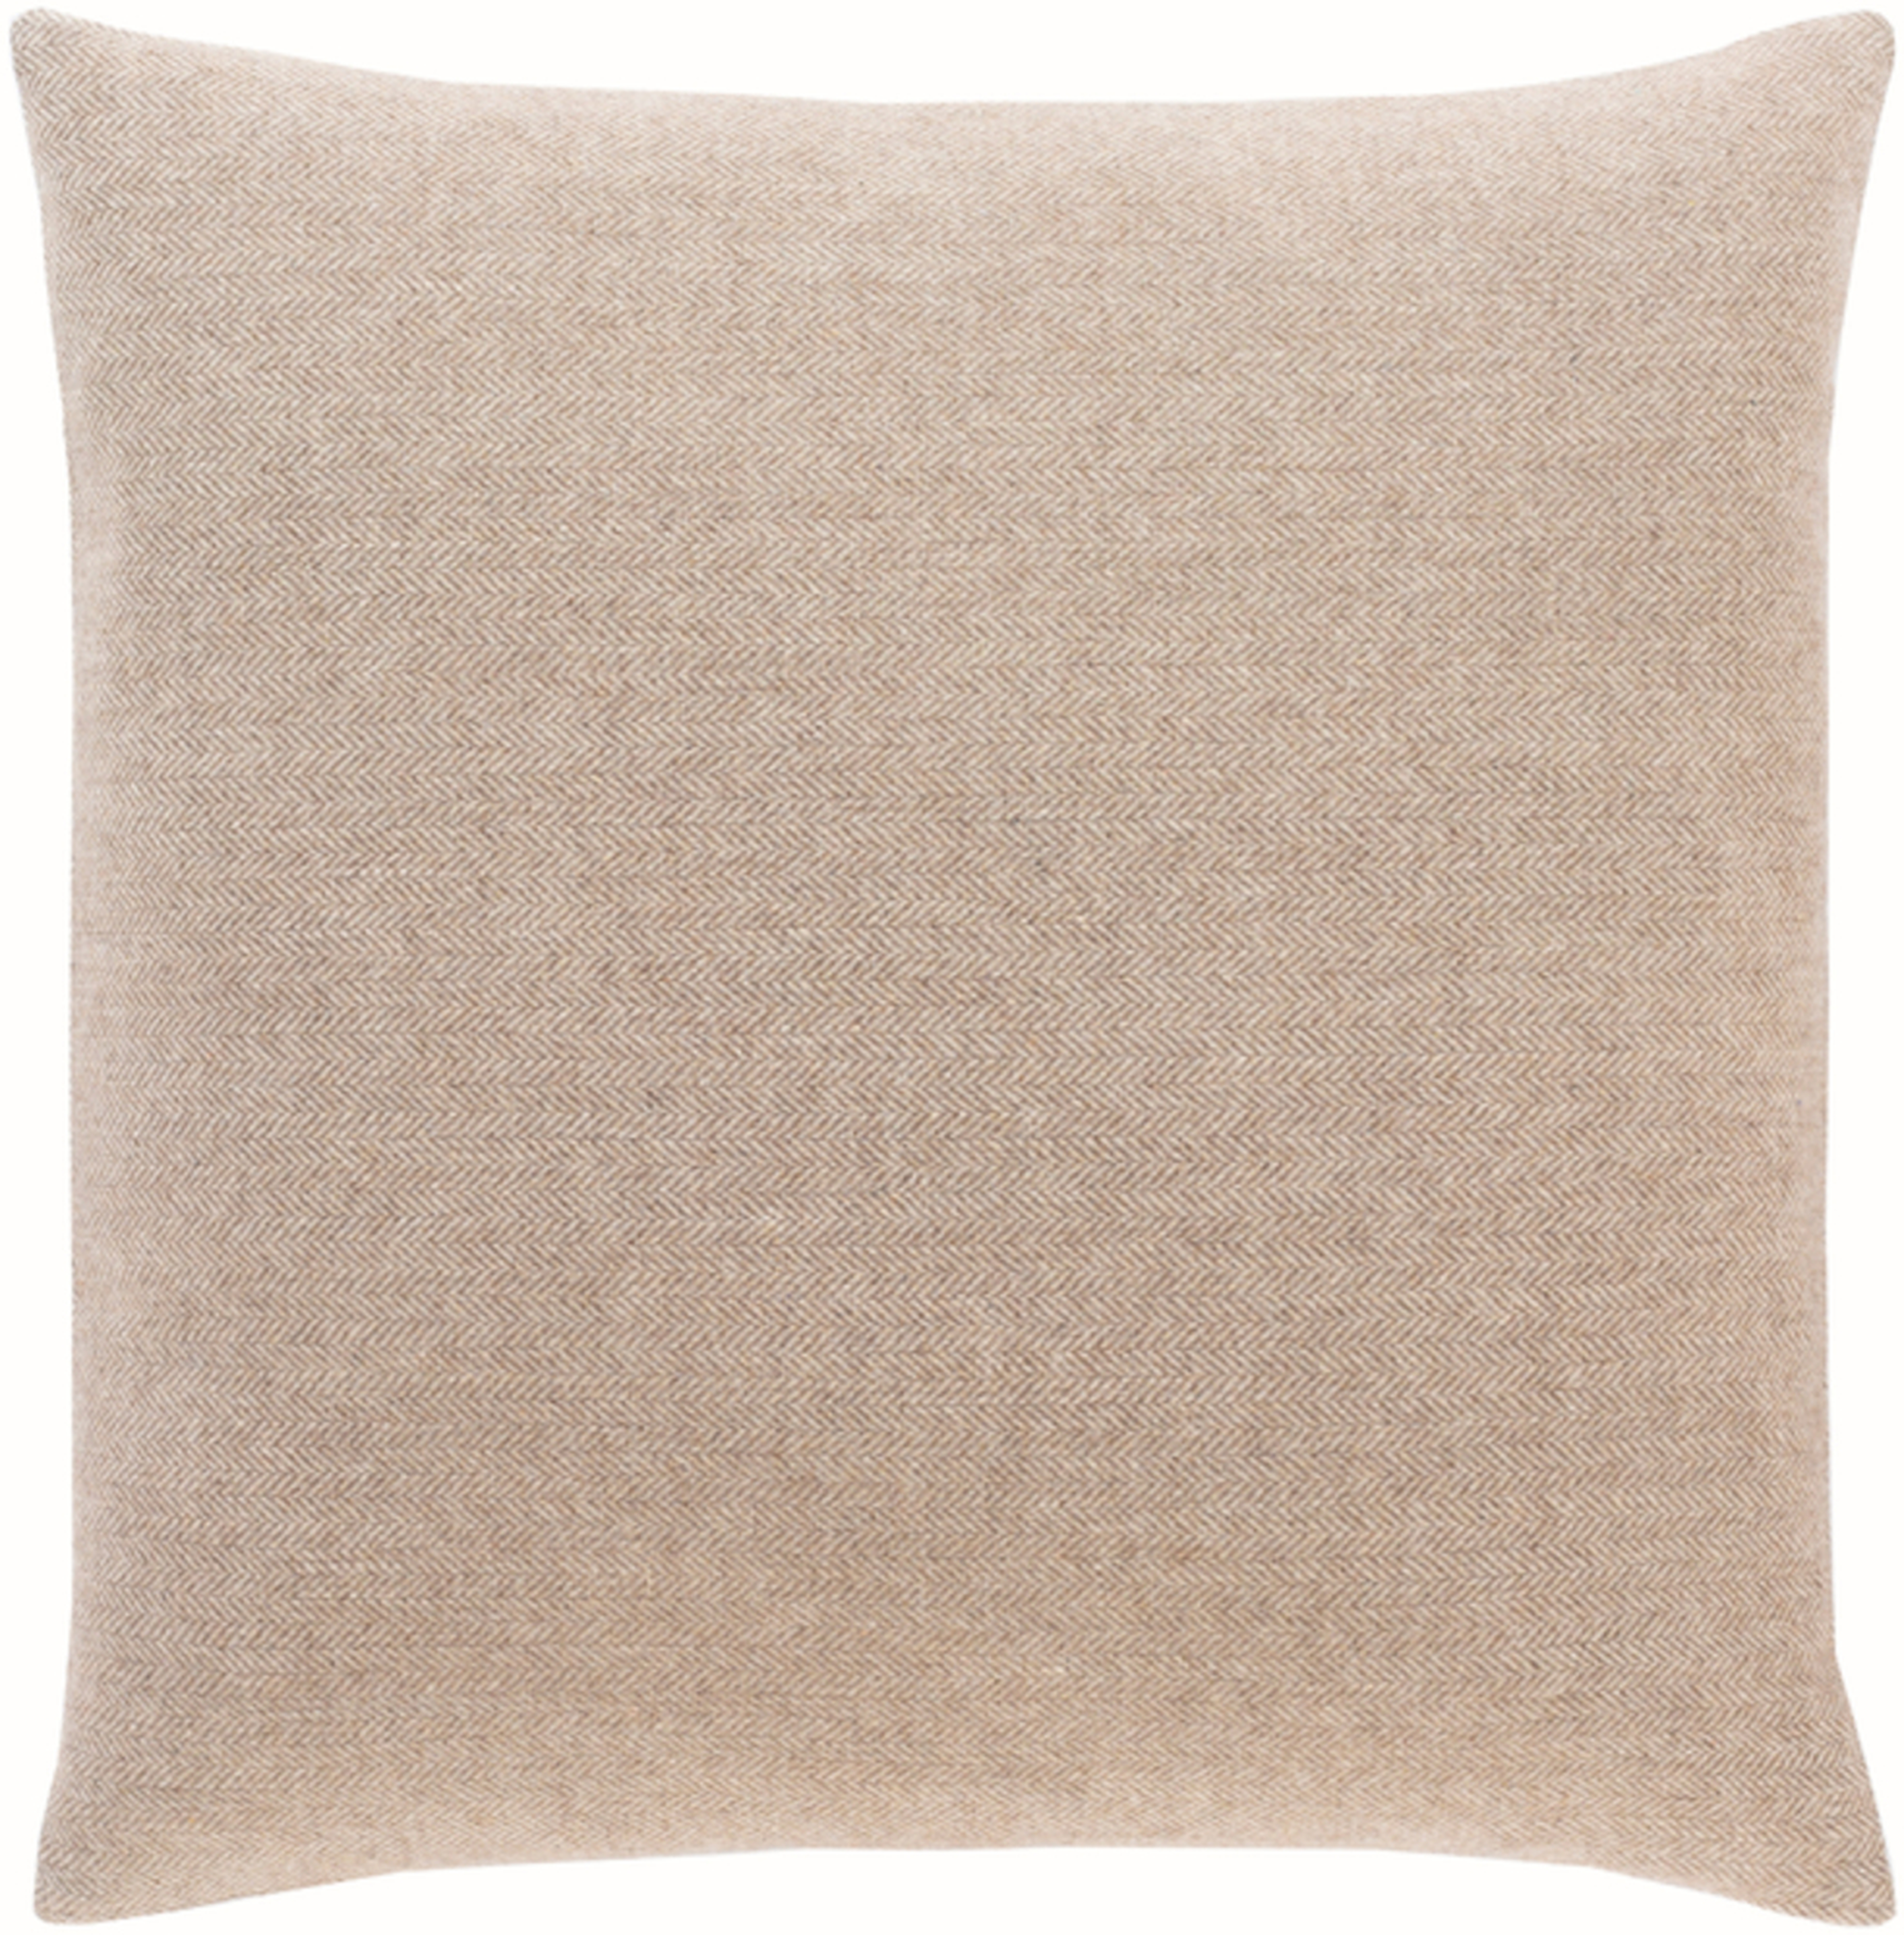 Wells Pillow, 22" x 22", Taupe with Insert - Cove Goods